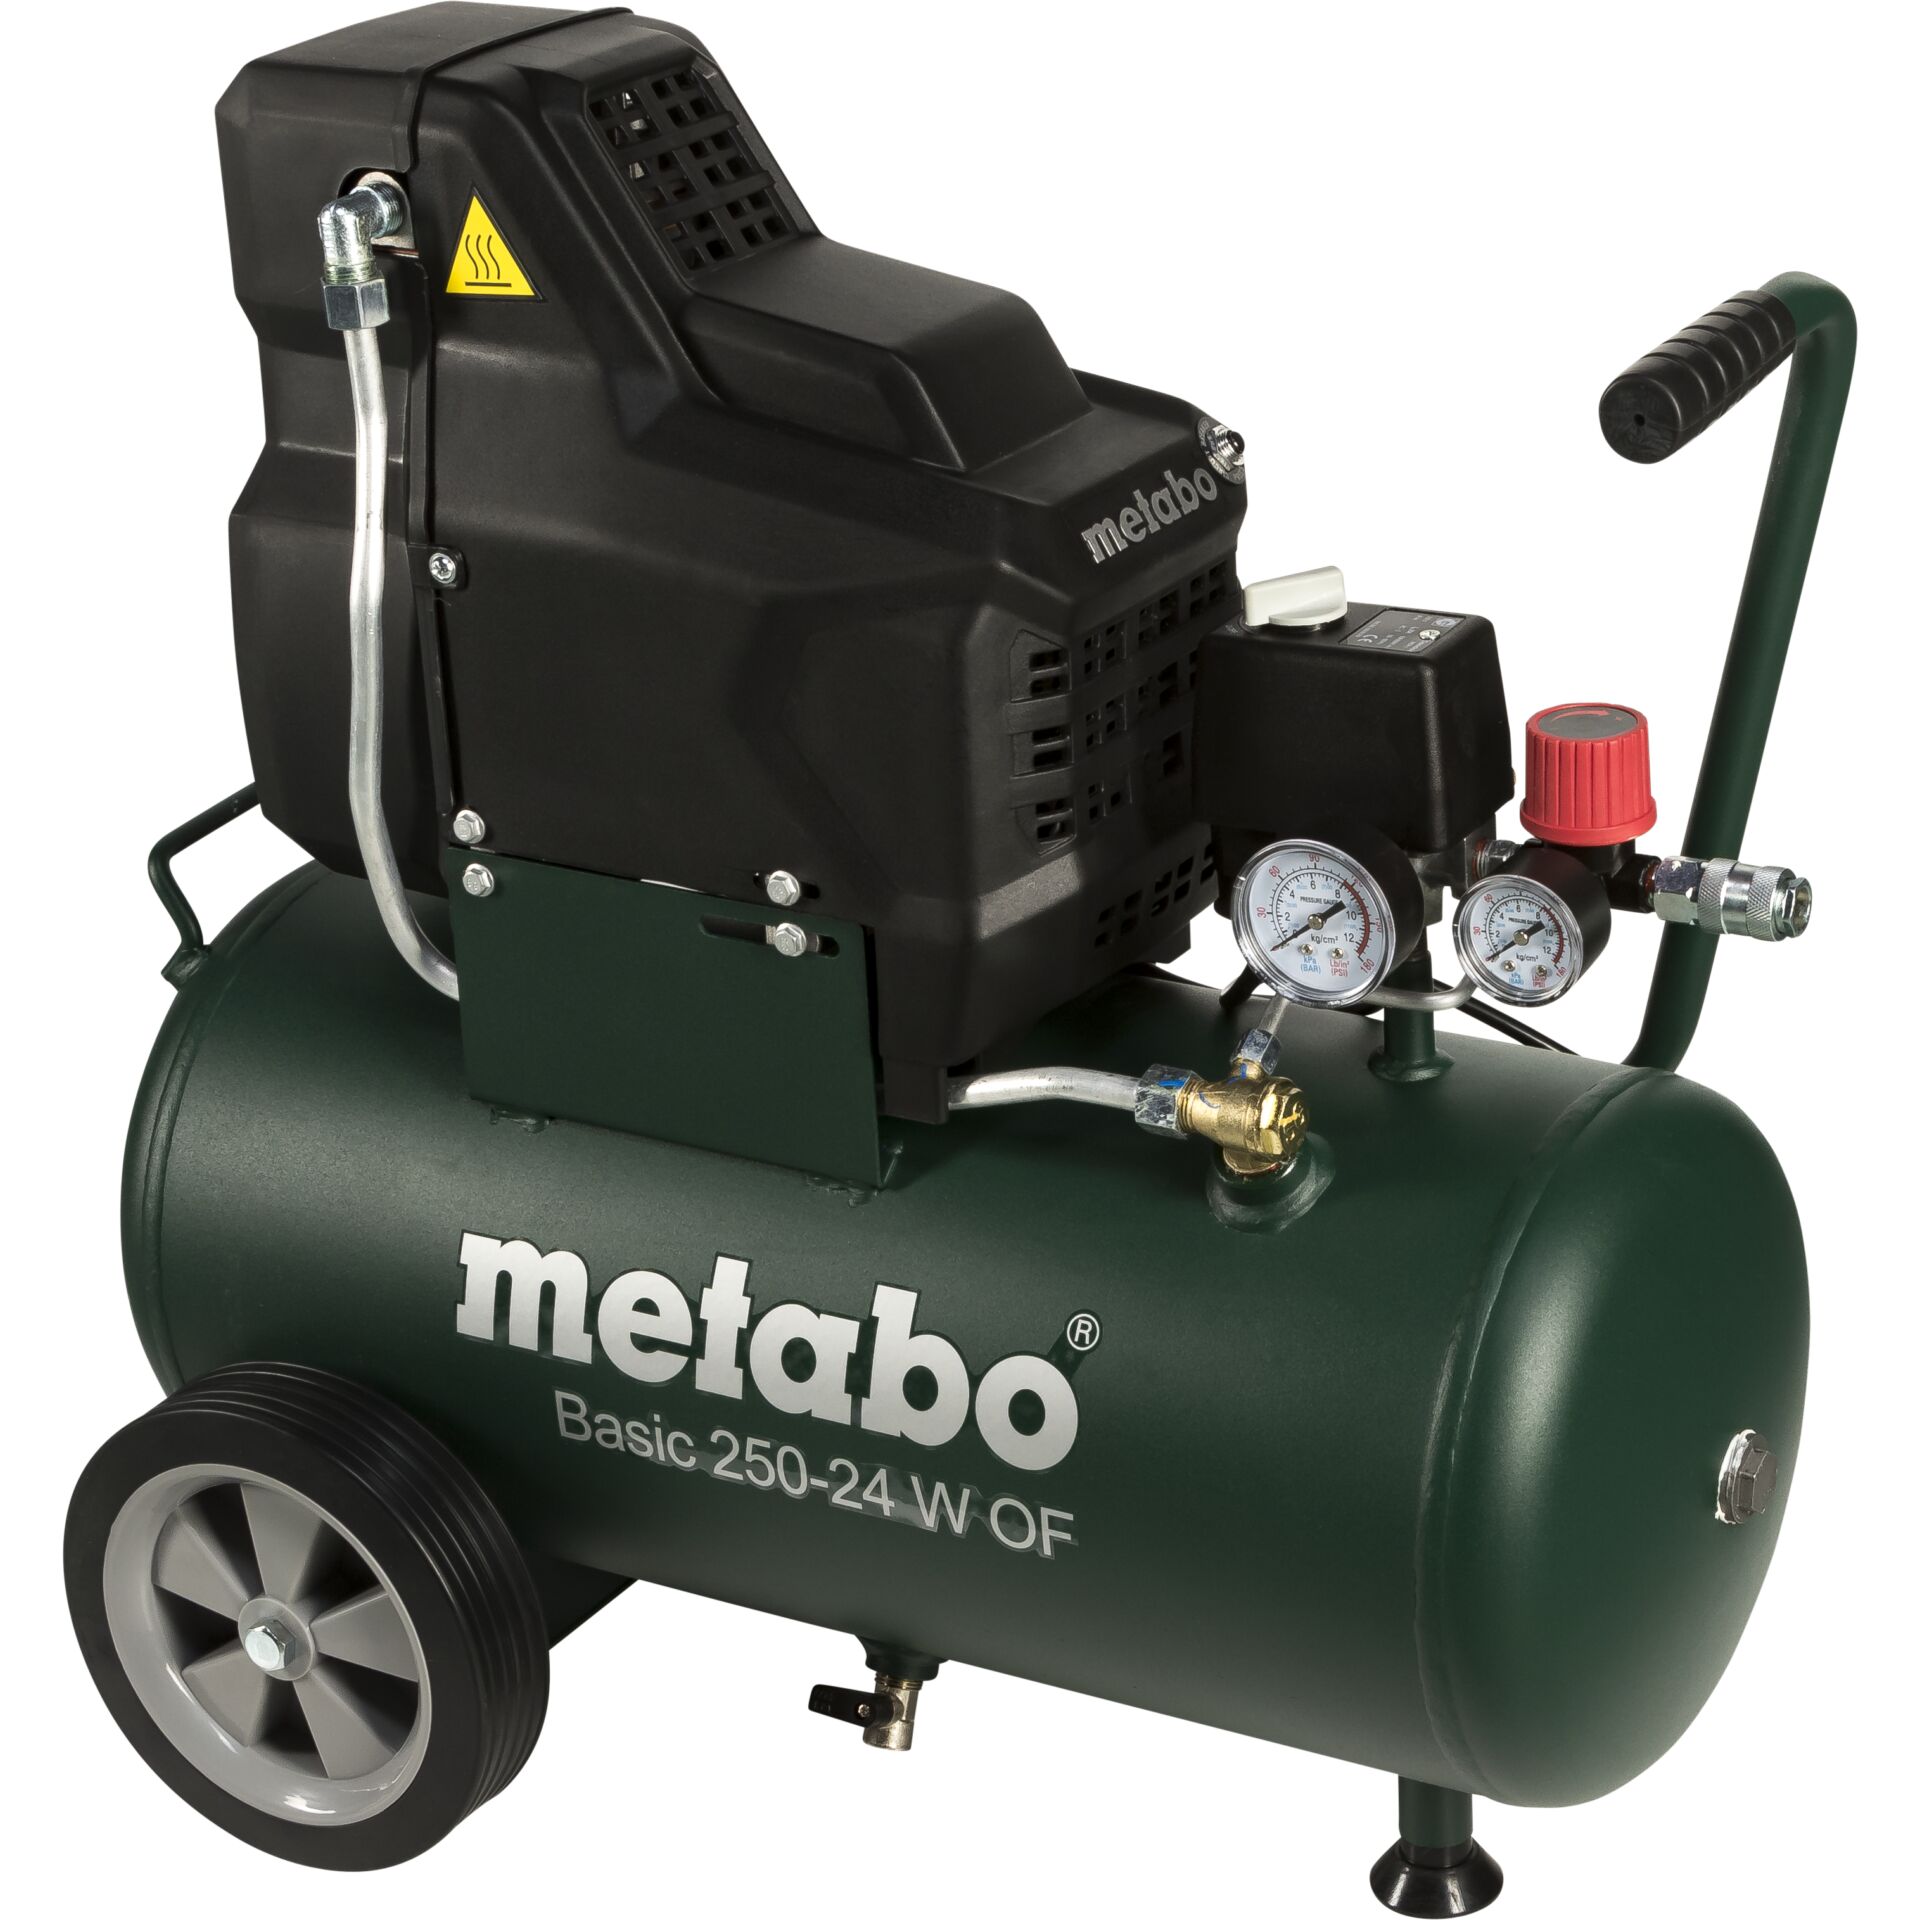 Metabo Basic 250-24 W OF compressore